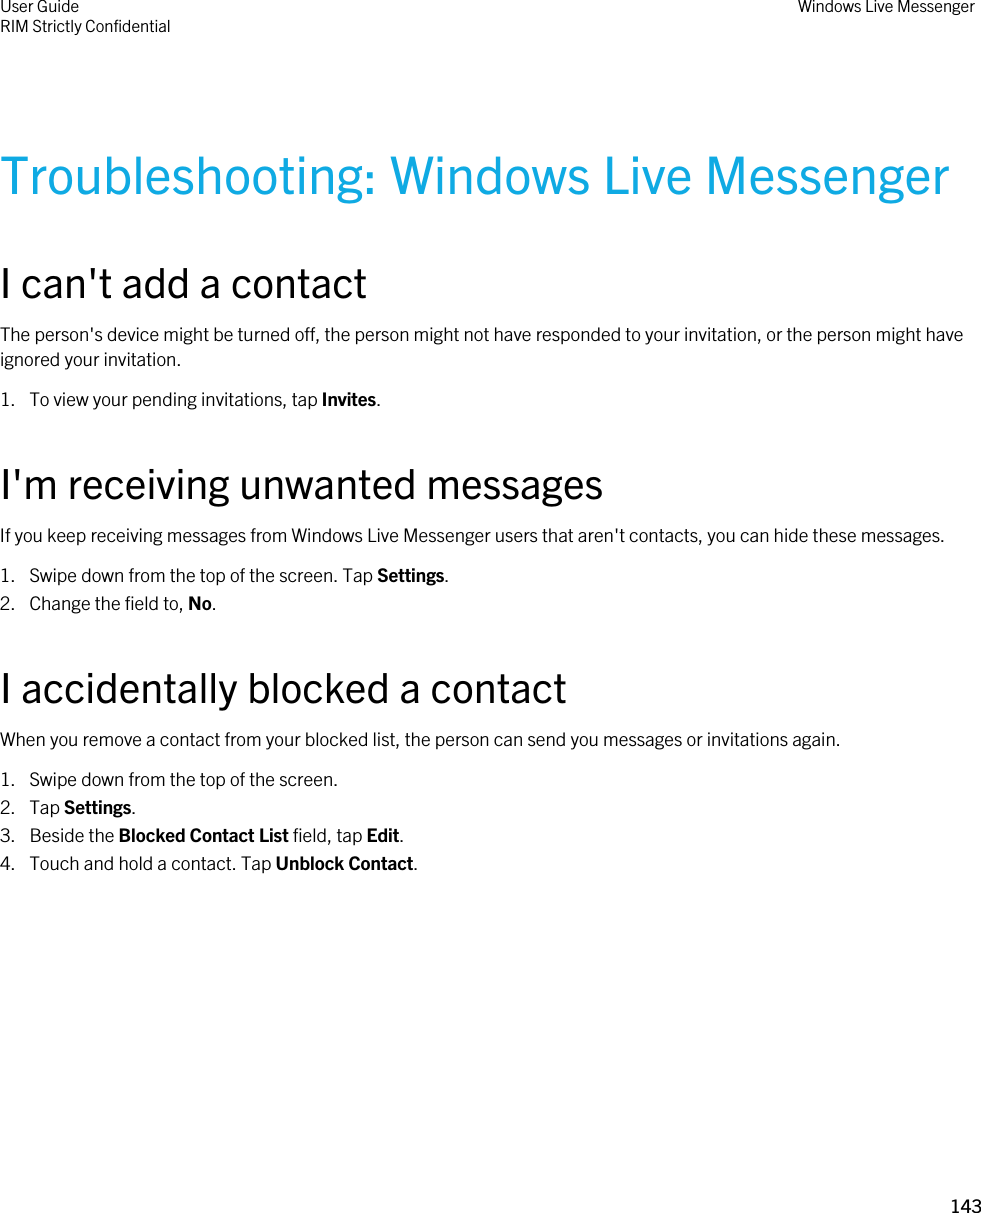 Troubleshooting: Windows Live MessengerI can&apos;t add a contactThe person&apos;s device might be turned off, the person might not have responded to your invitation, or the person might have ignored your invitation.1. To view your pending invitations, tap Invites.I&apos;m receiving unwanted messagesIf you keep receiving messages from Windows Live Messenger users that aren&apos;t contacts, you can hide these messages.1. Swipe down from the top of the screen. Tap Settings.2. Change the field to, No.I accidentally blocked a contactWhen you remove a contact from your blocked list, the person can send you messages or invitations again.1. Swipe down from the top of the screen.2. Tap Settings.3. Beside the Blocked Contact List field, tap Edit.4. Touch and hold a contact. Tap Unblock Contact.User GuideRIM Strictly ConfidentialWindows Live Messenger143 